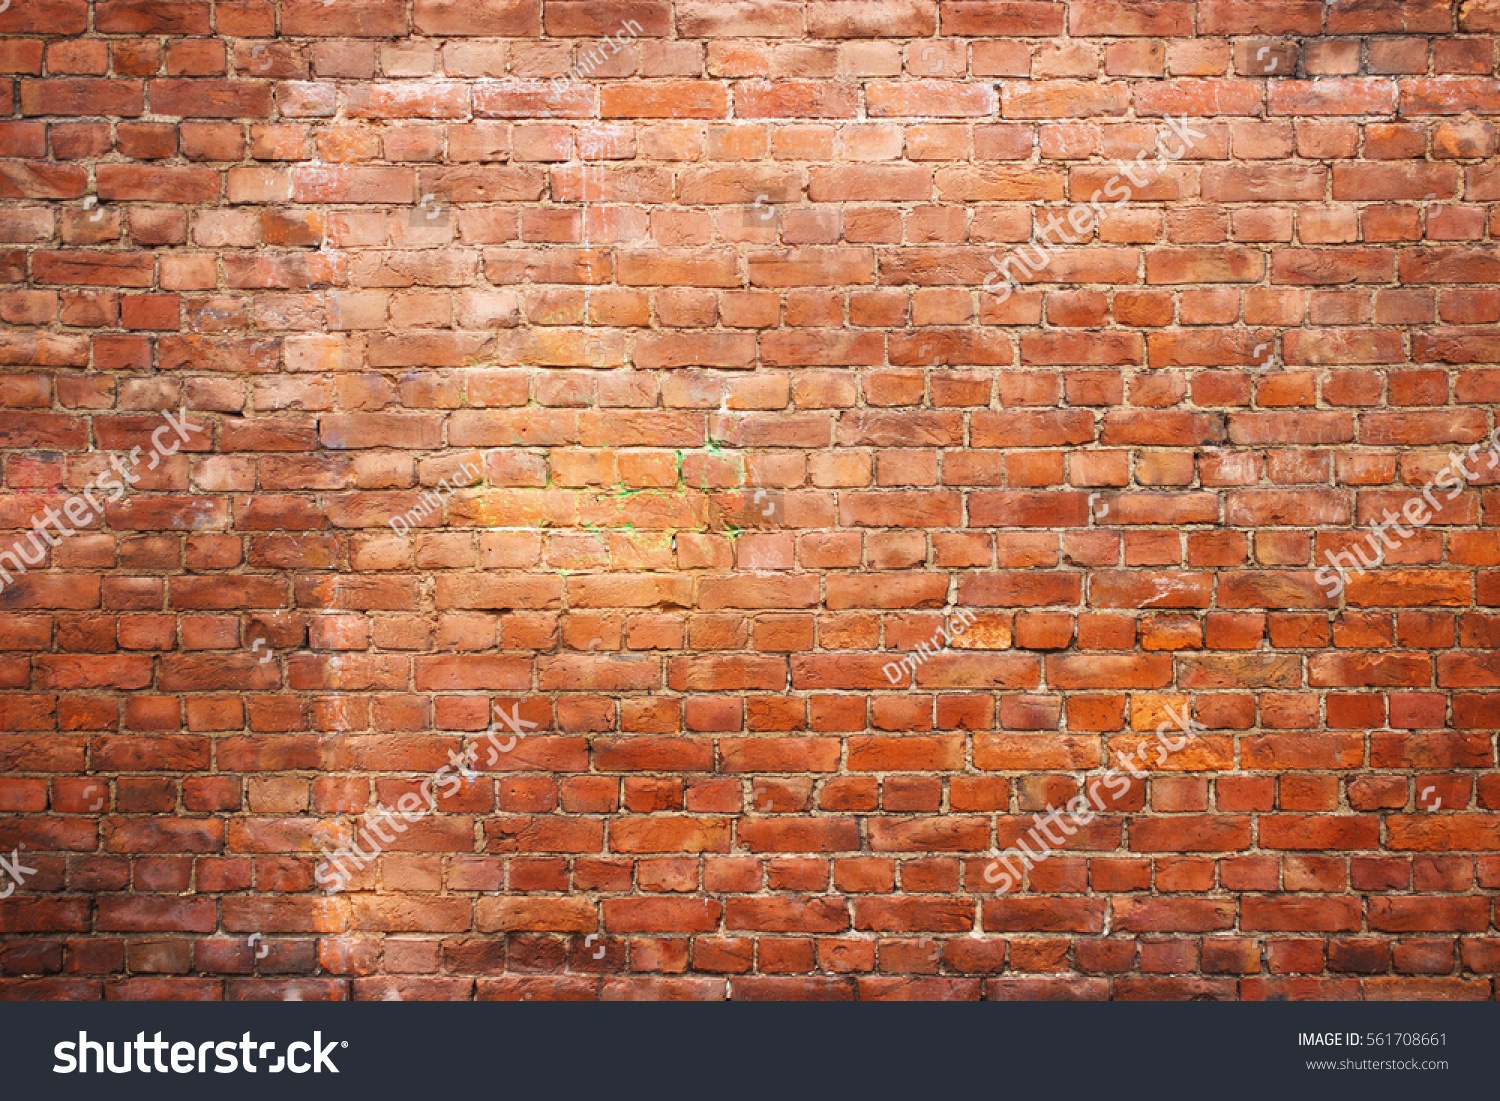 Old brick wall, old texture of red stone blocks closeup #561708661